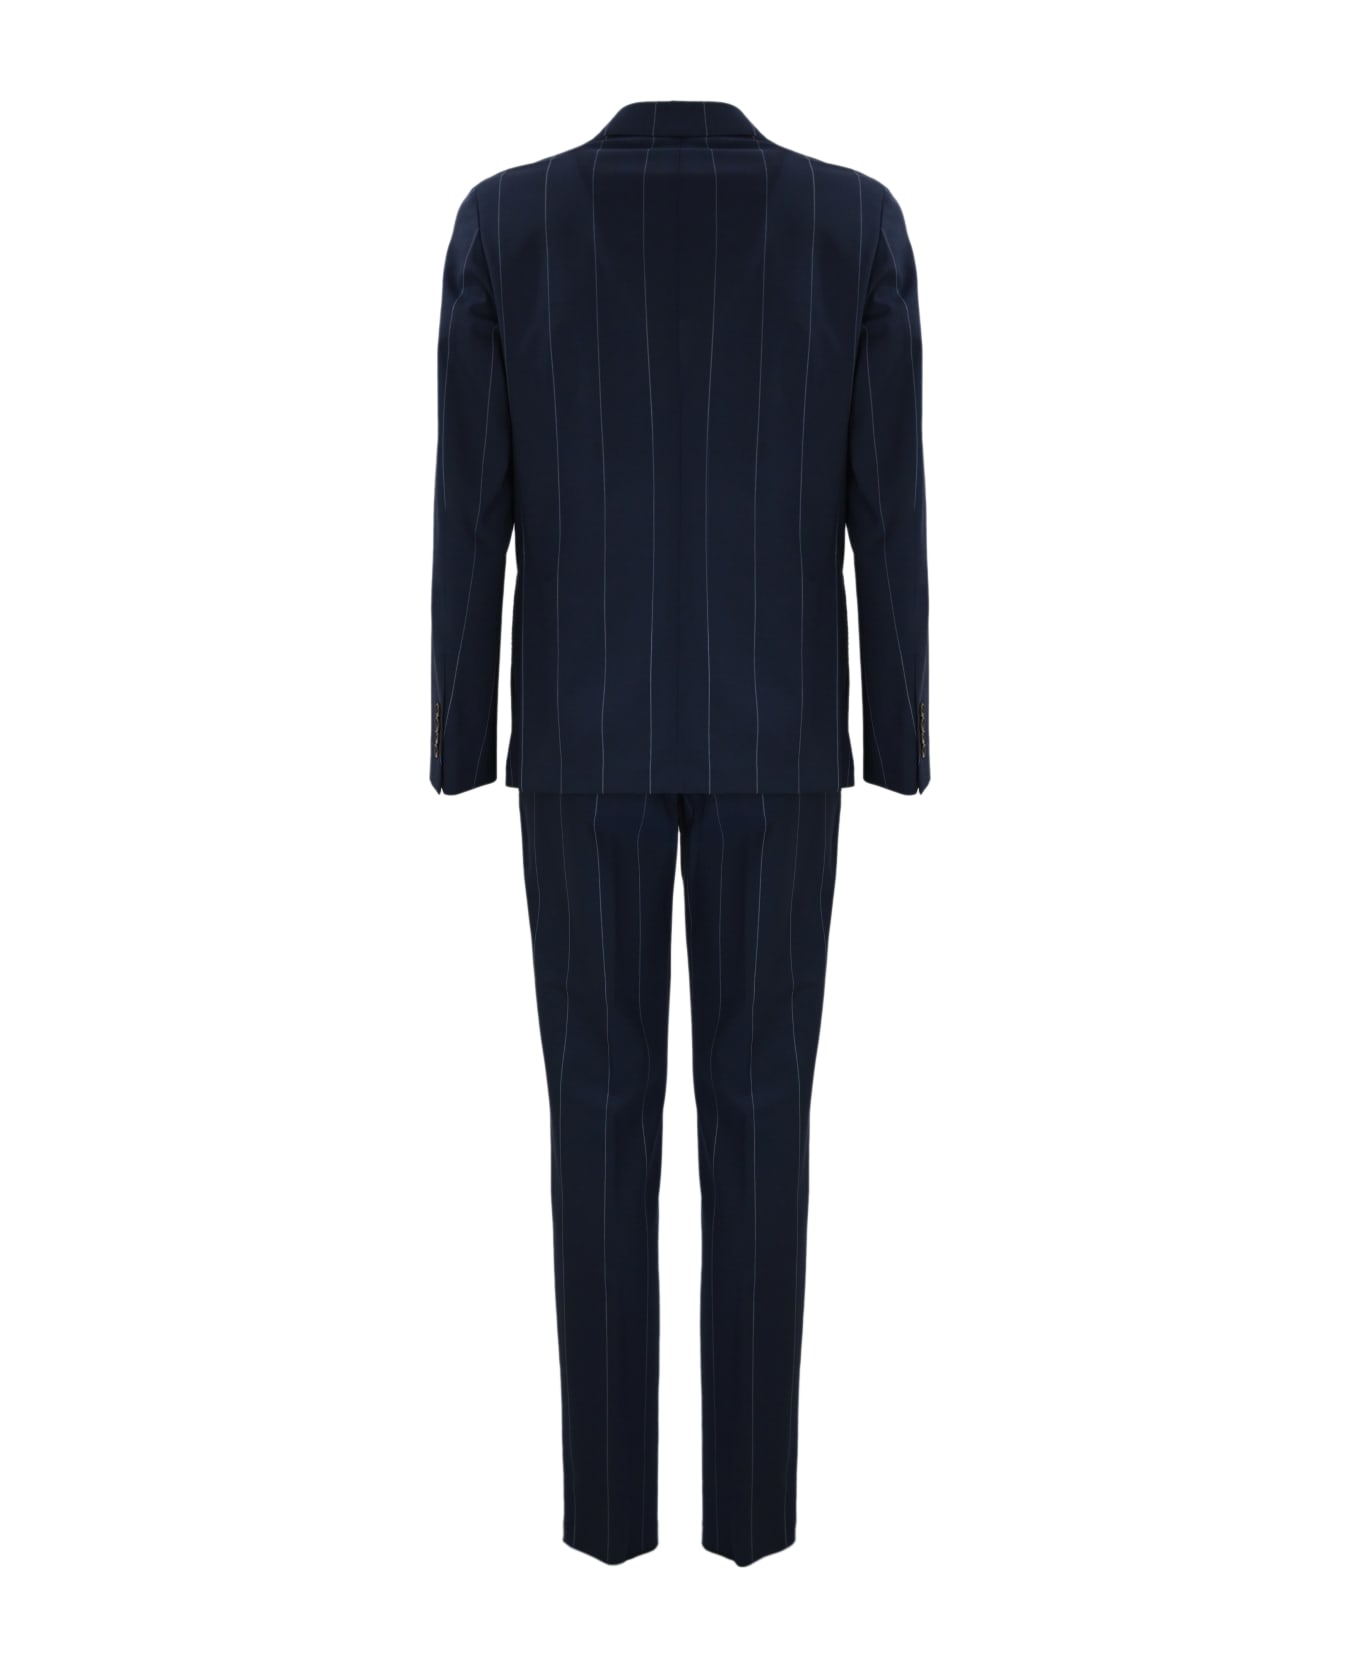 Eleventy Blue Double-breasted Pinstripe Suit - Blu スーツ